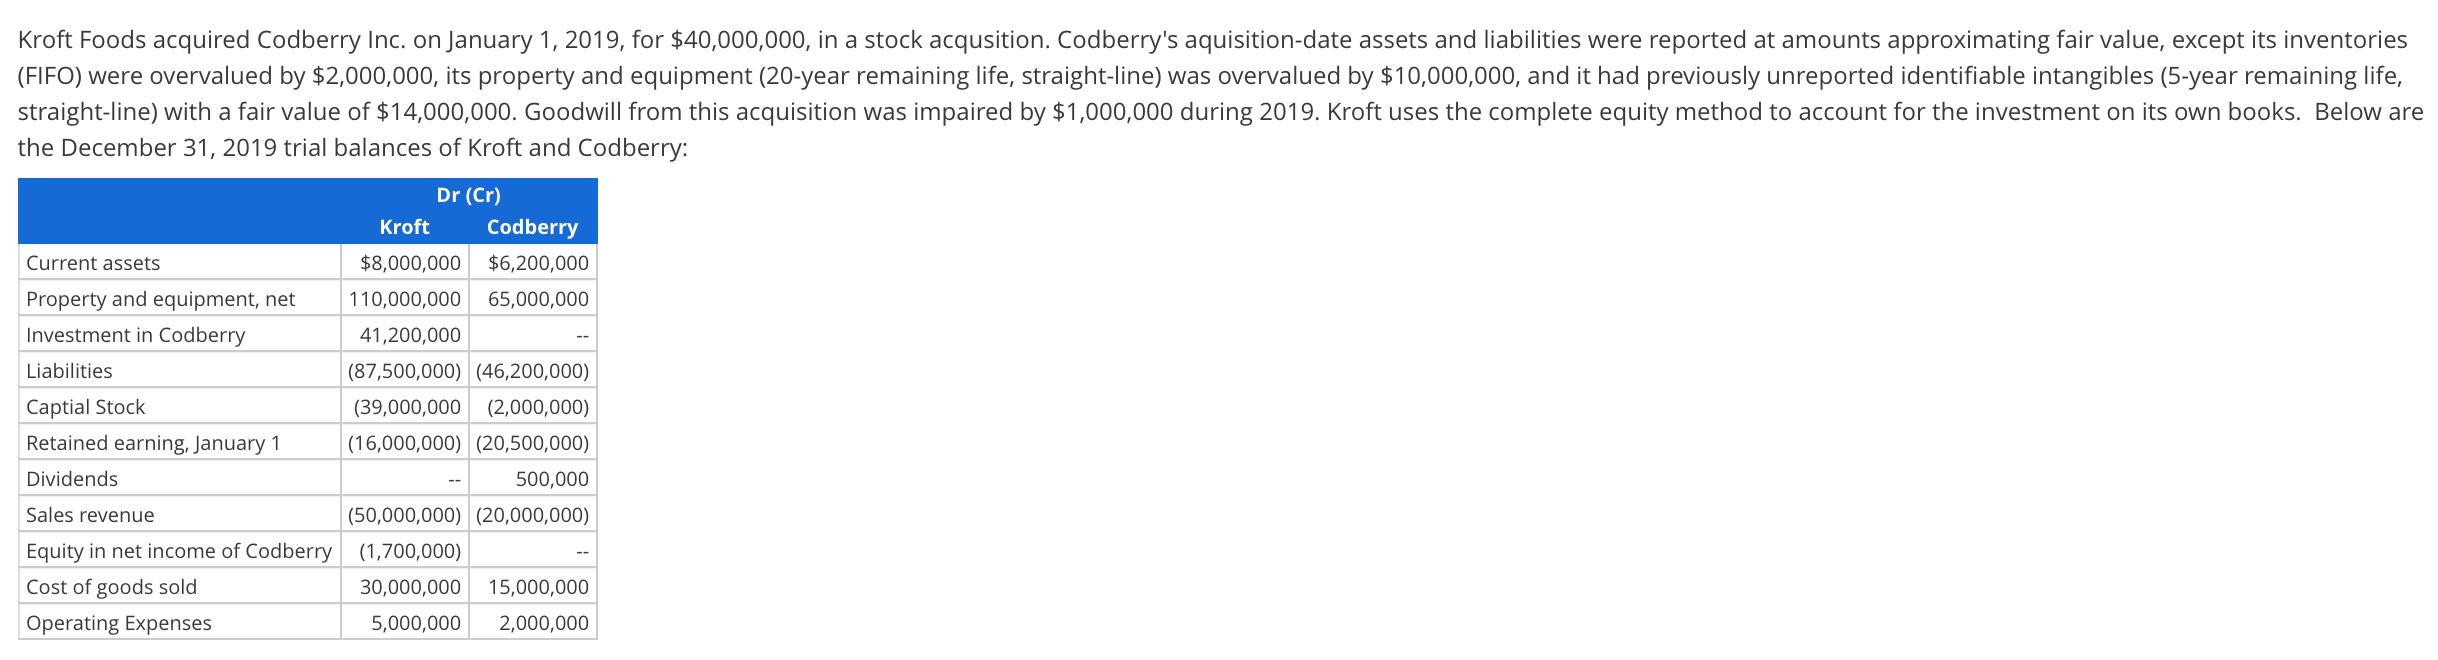 Kroft Foods acquired Codberry Inc. on January 1, 2019, for $40,000,000, in a stock acqusition. Codberrys aquisition-date ass